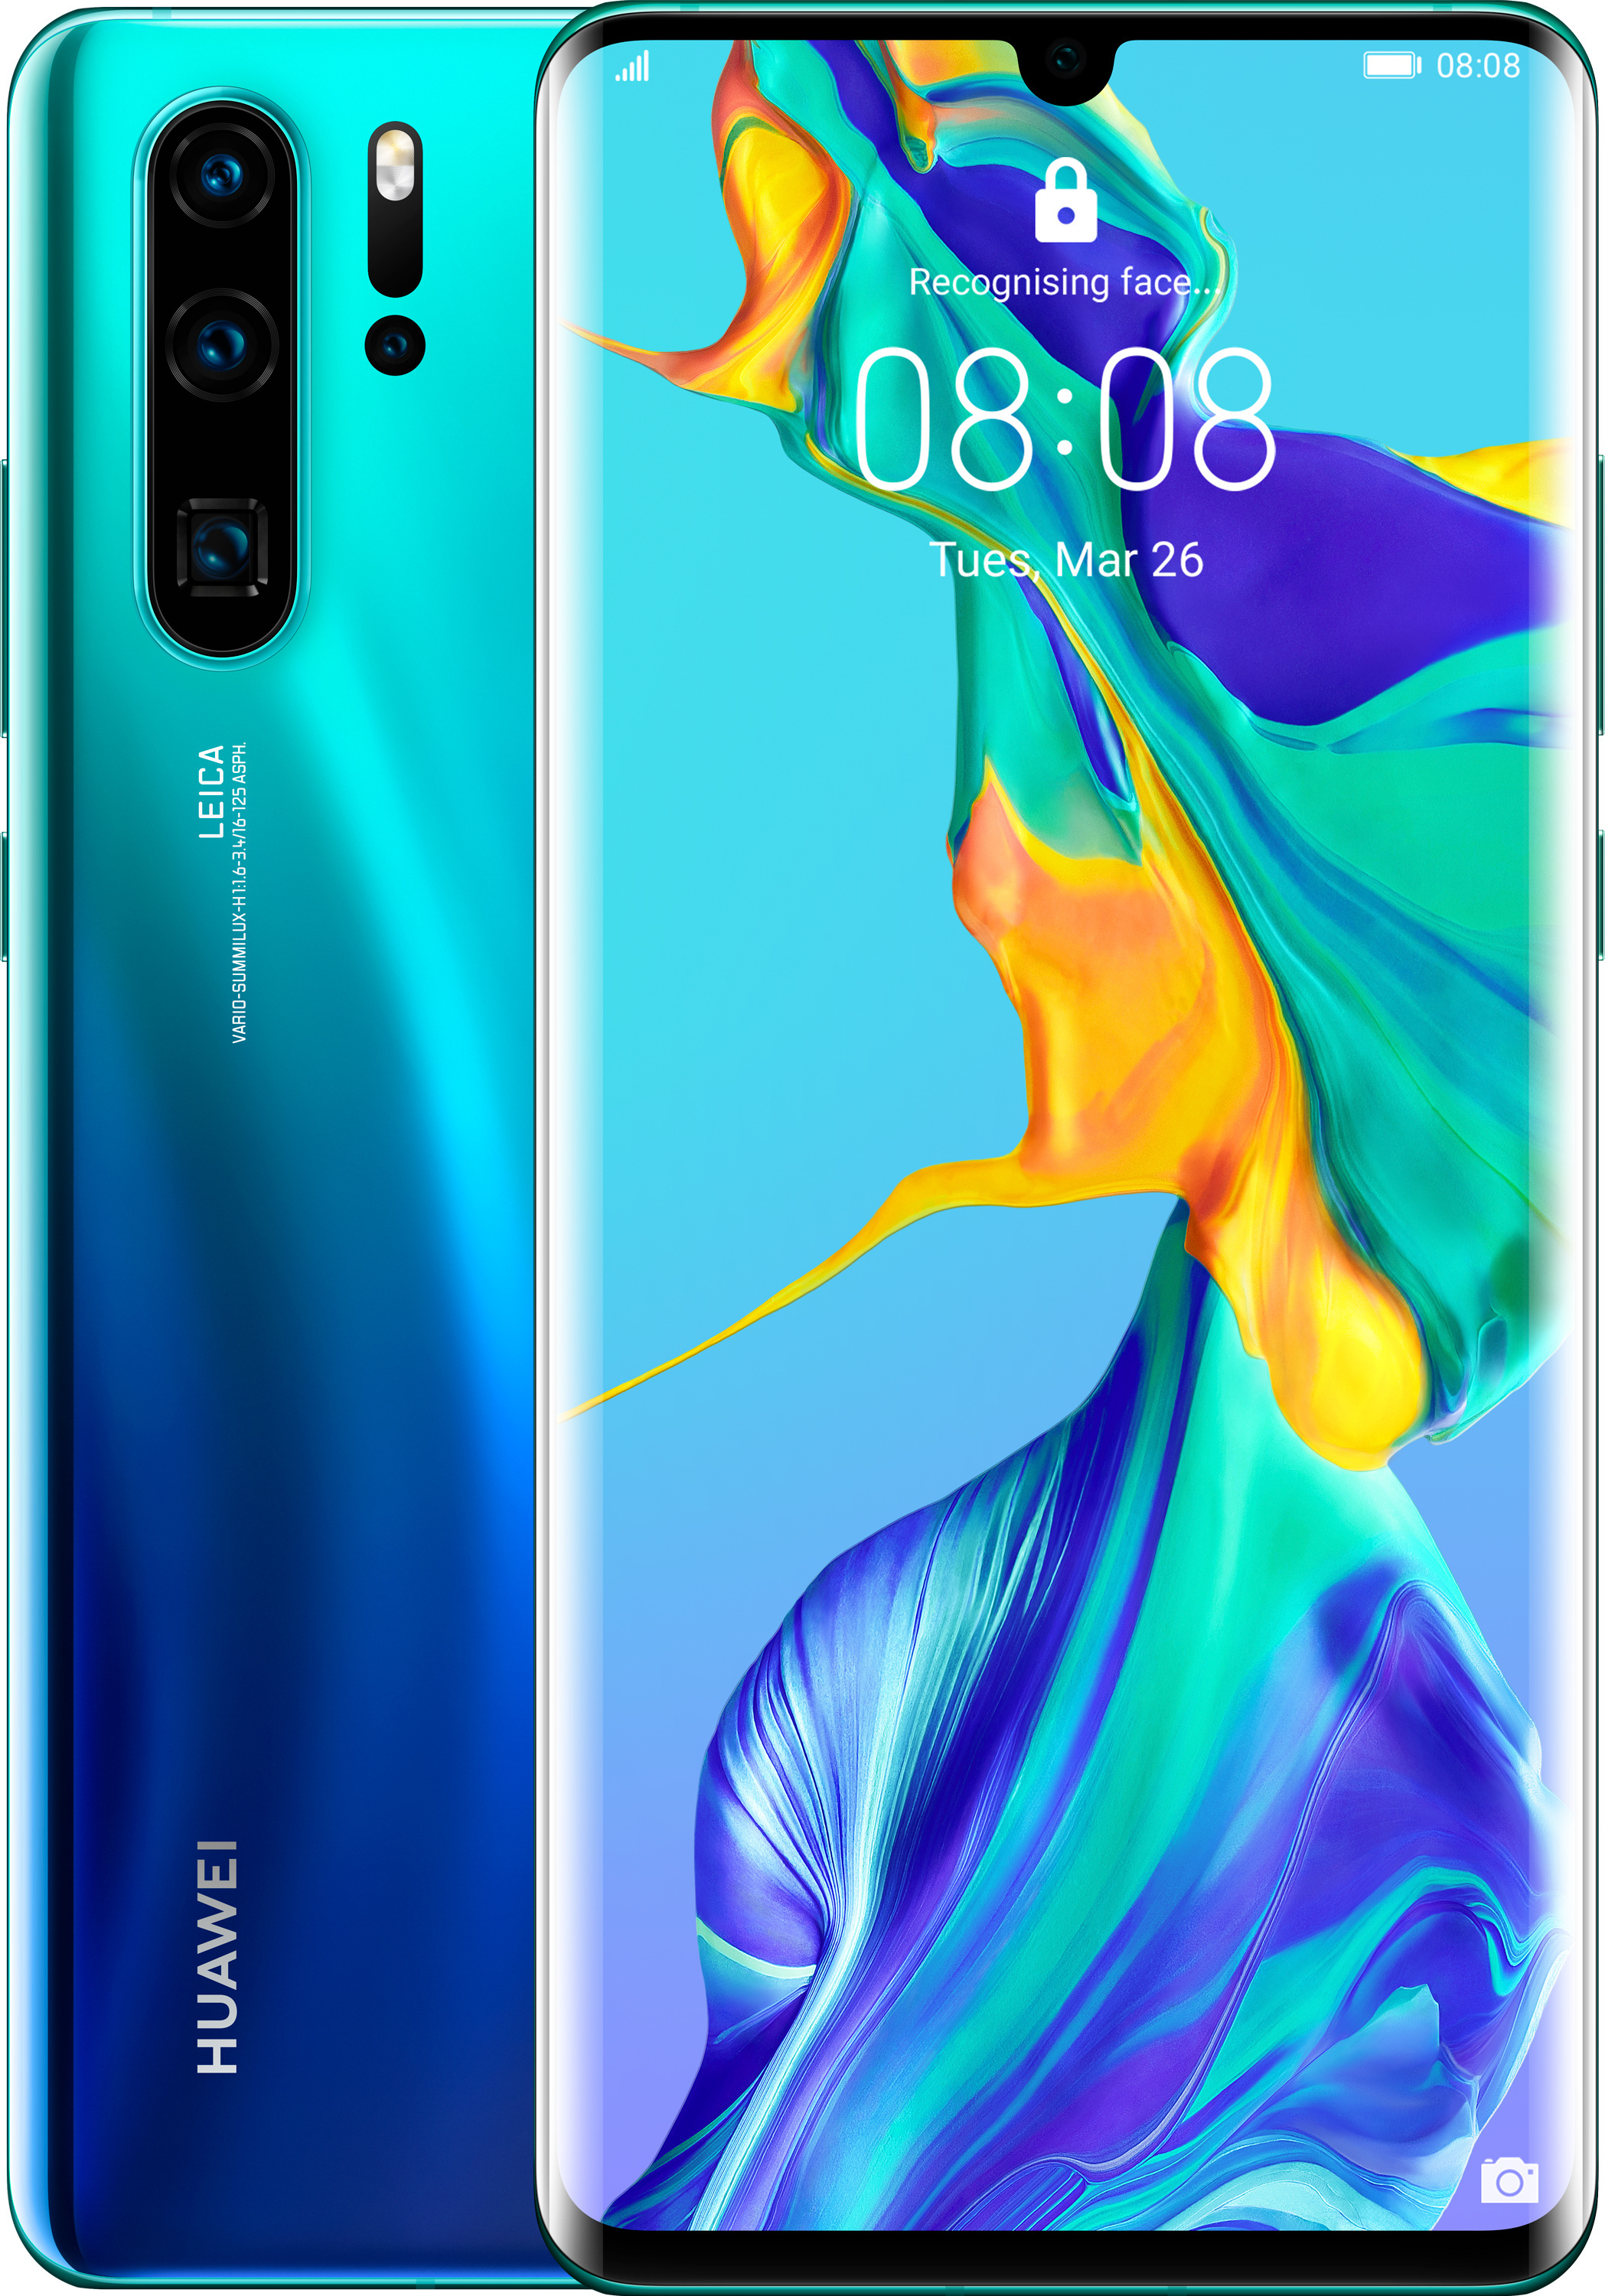 Huawei P30 Pro 128 Gt -Android-puhelin, Dual-SIM ...